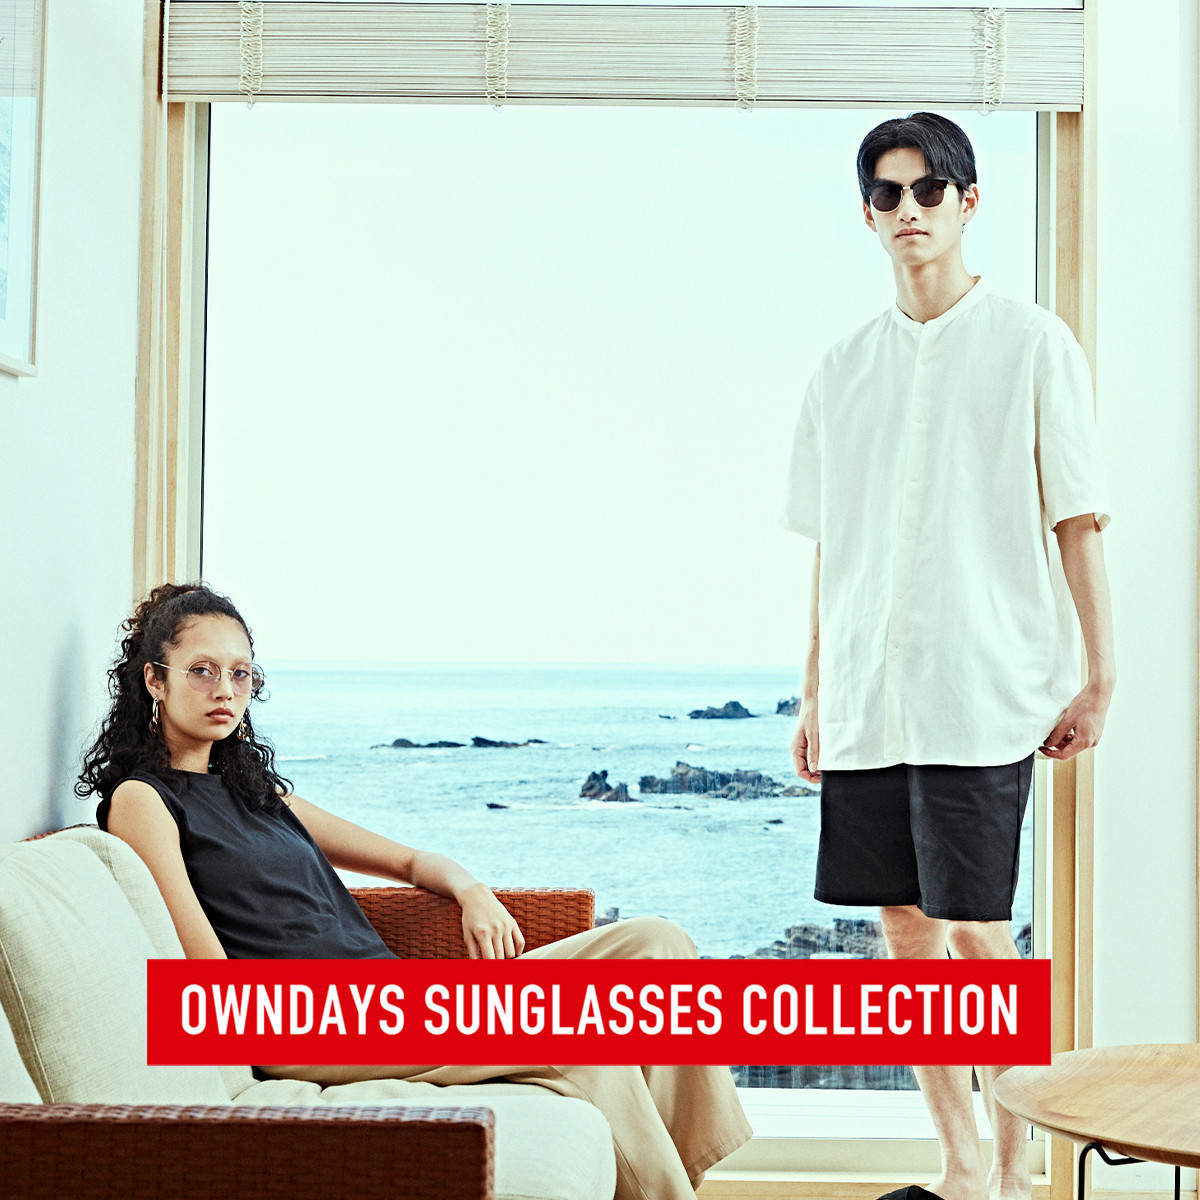 OWNDAYS SUNGLASSES COLLECTION 2020